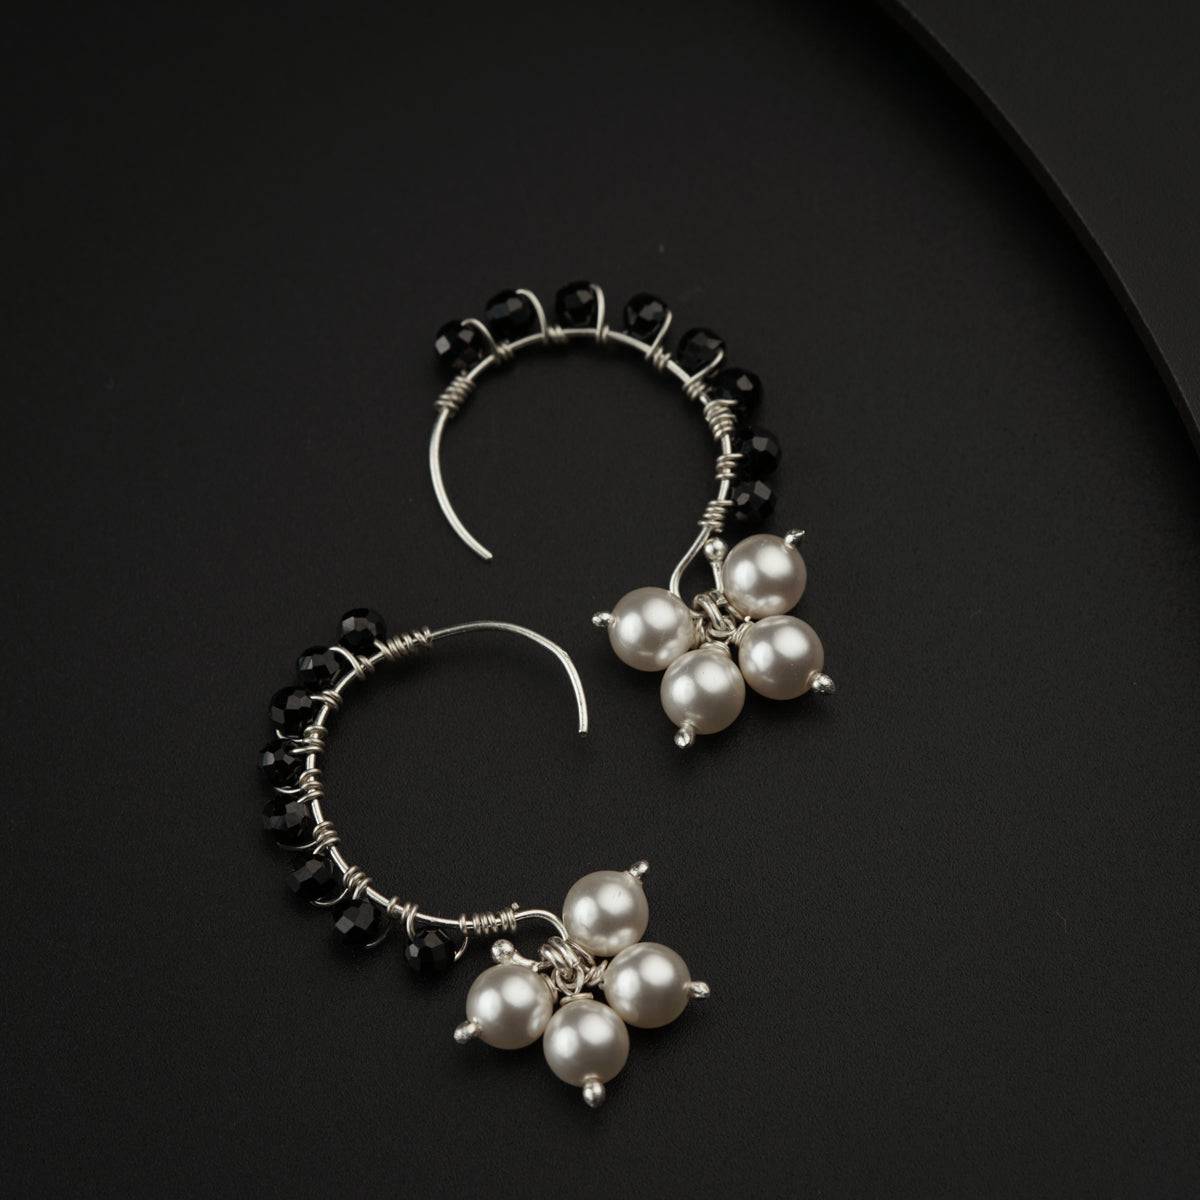 Hook Style Earring with Pearls and Black Spinel